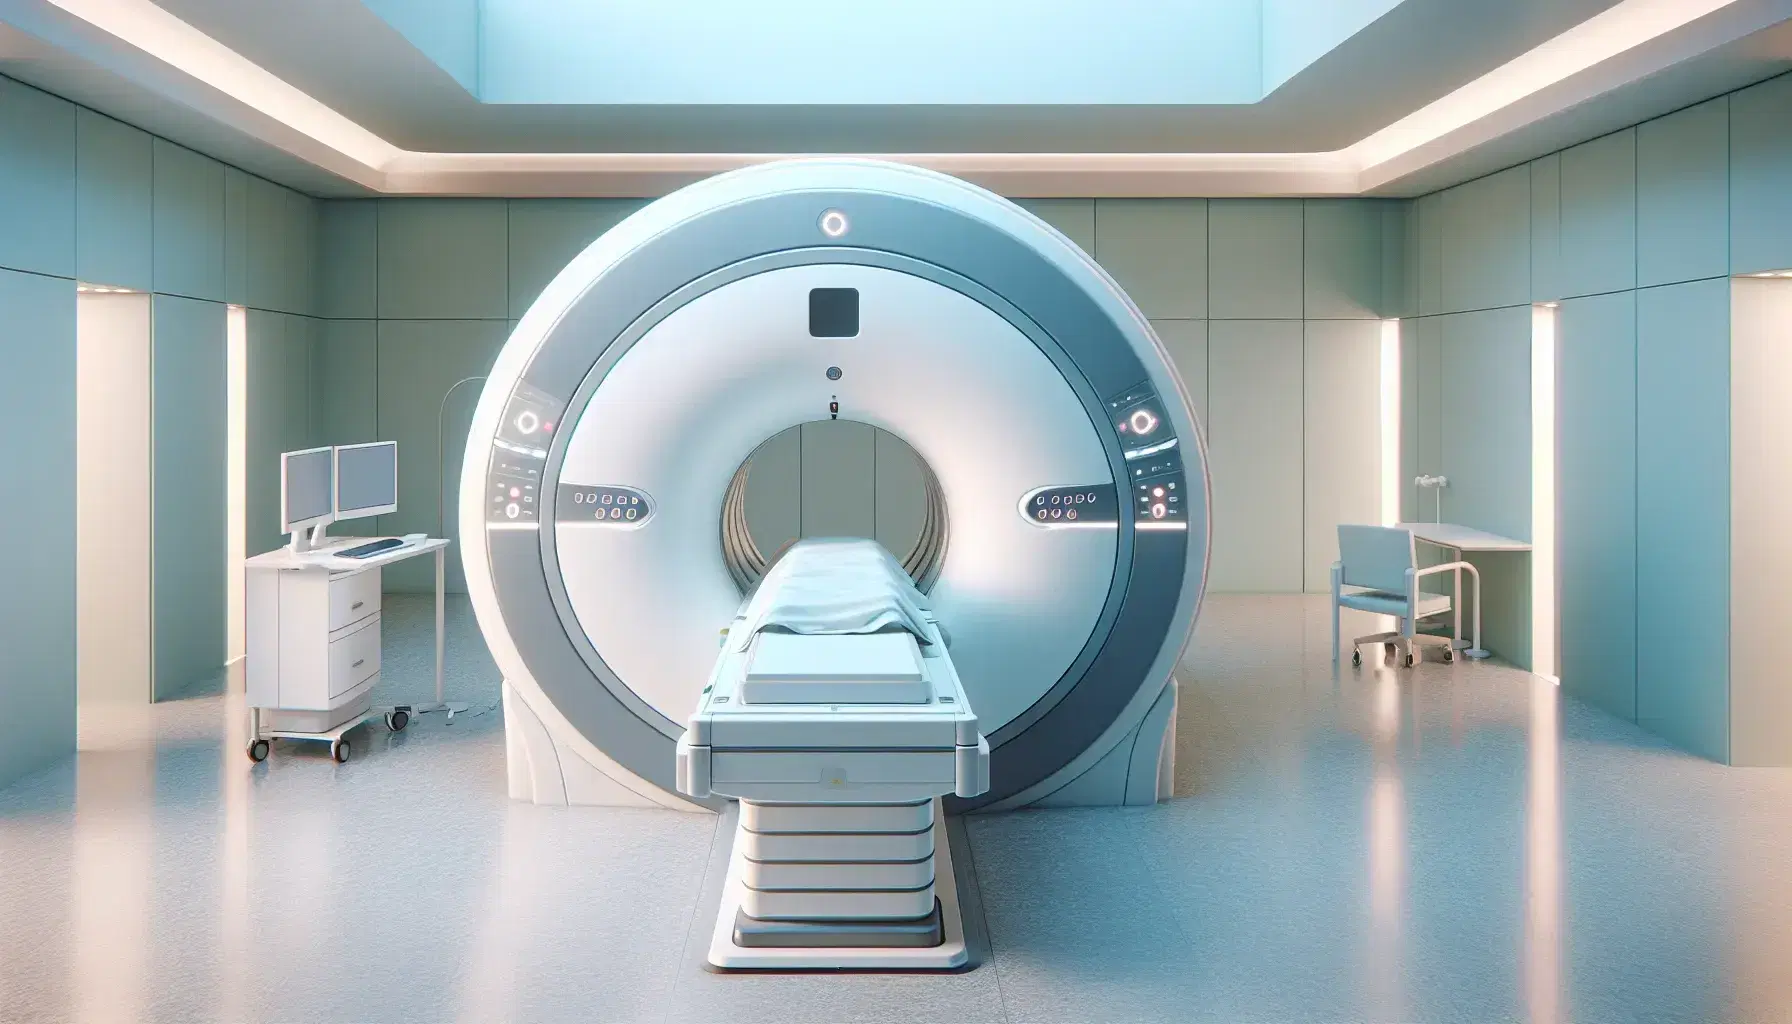 Modern MRI machine in a clinical environment with patient table, computer station and operator in lab coat.